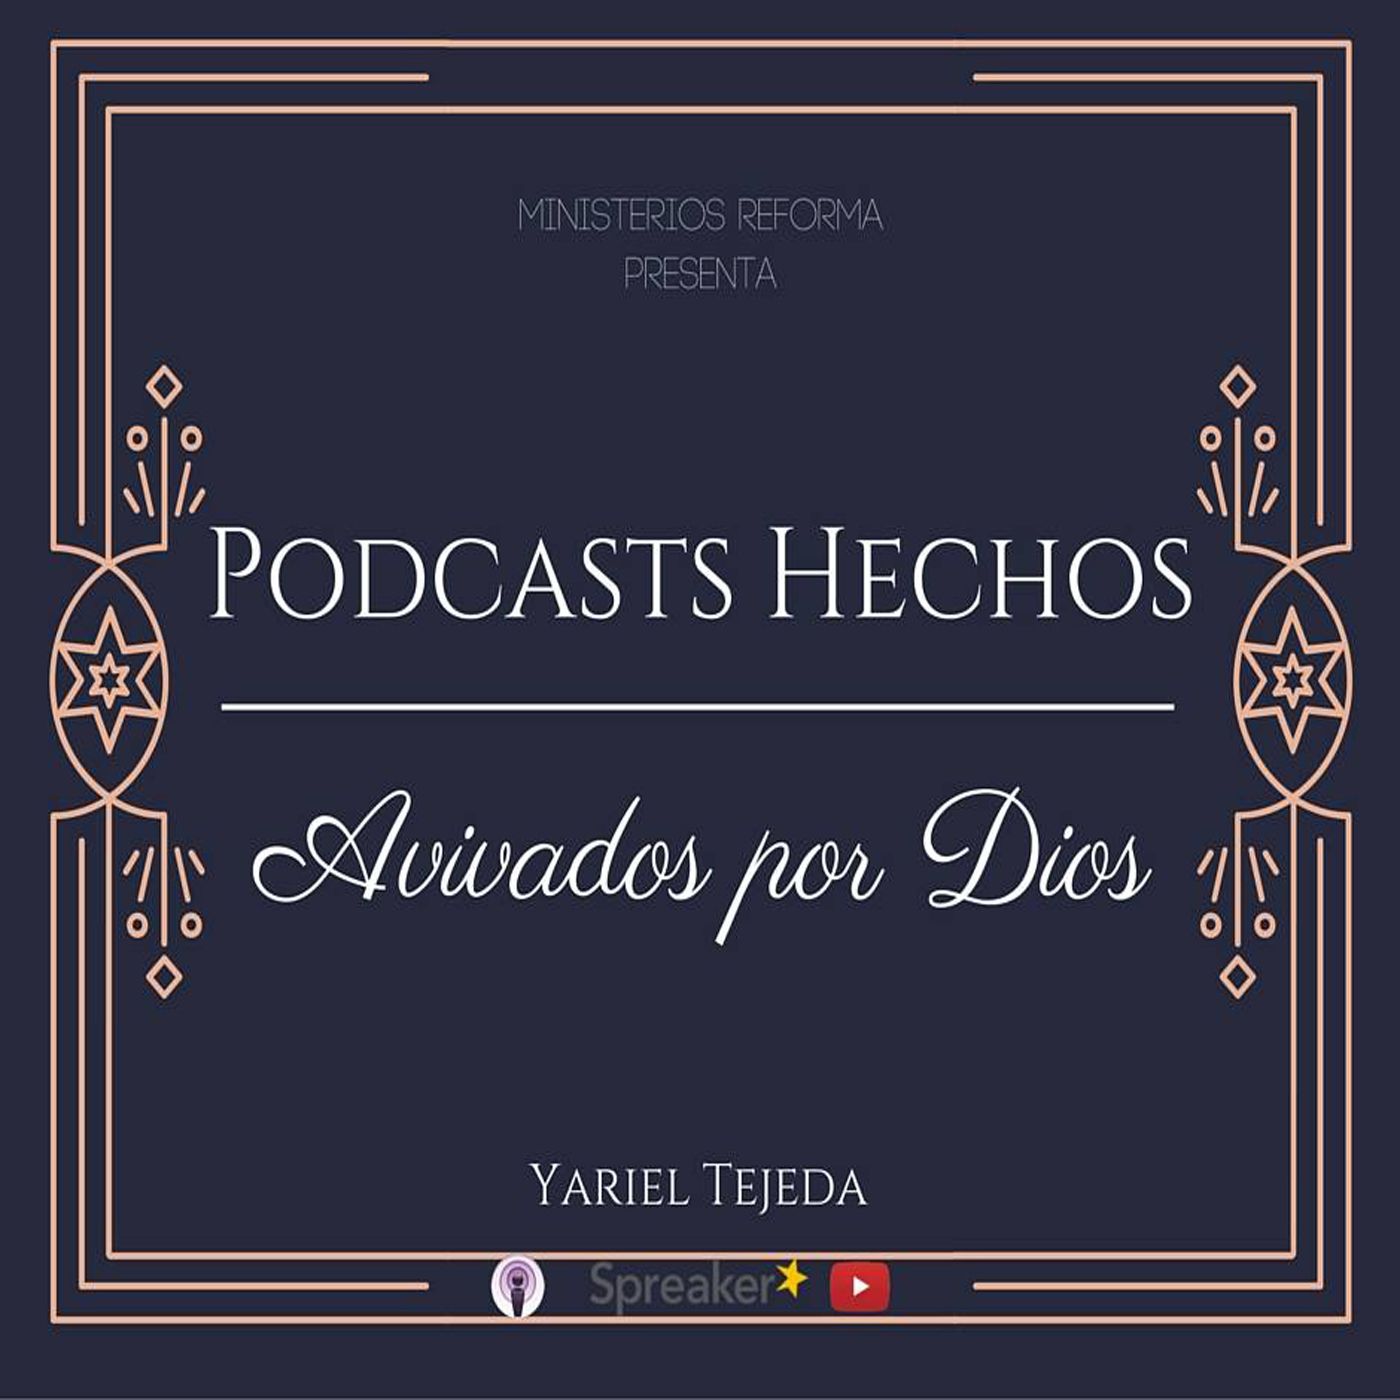 Hechos podcasts